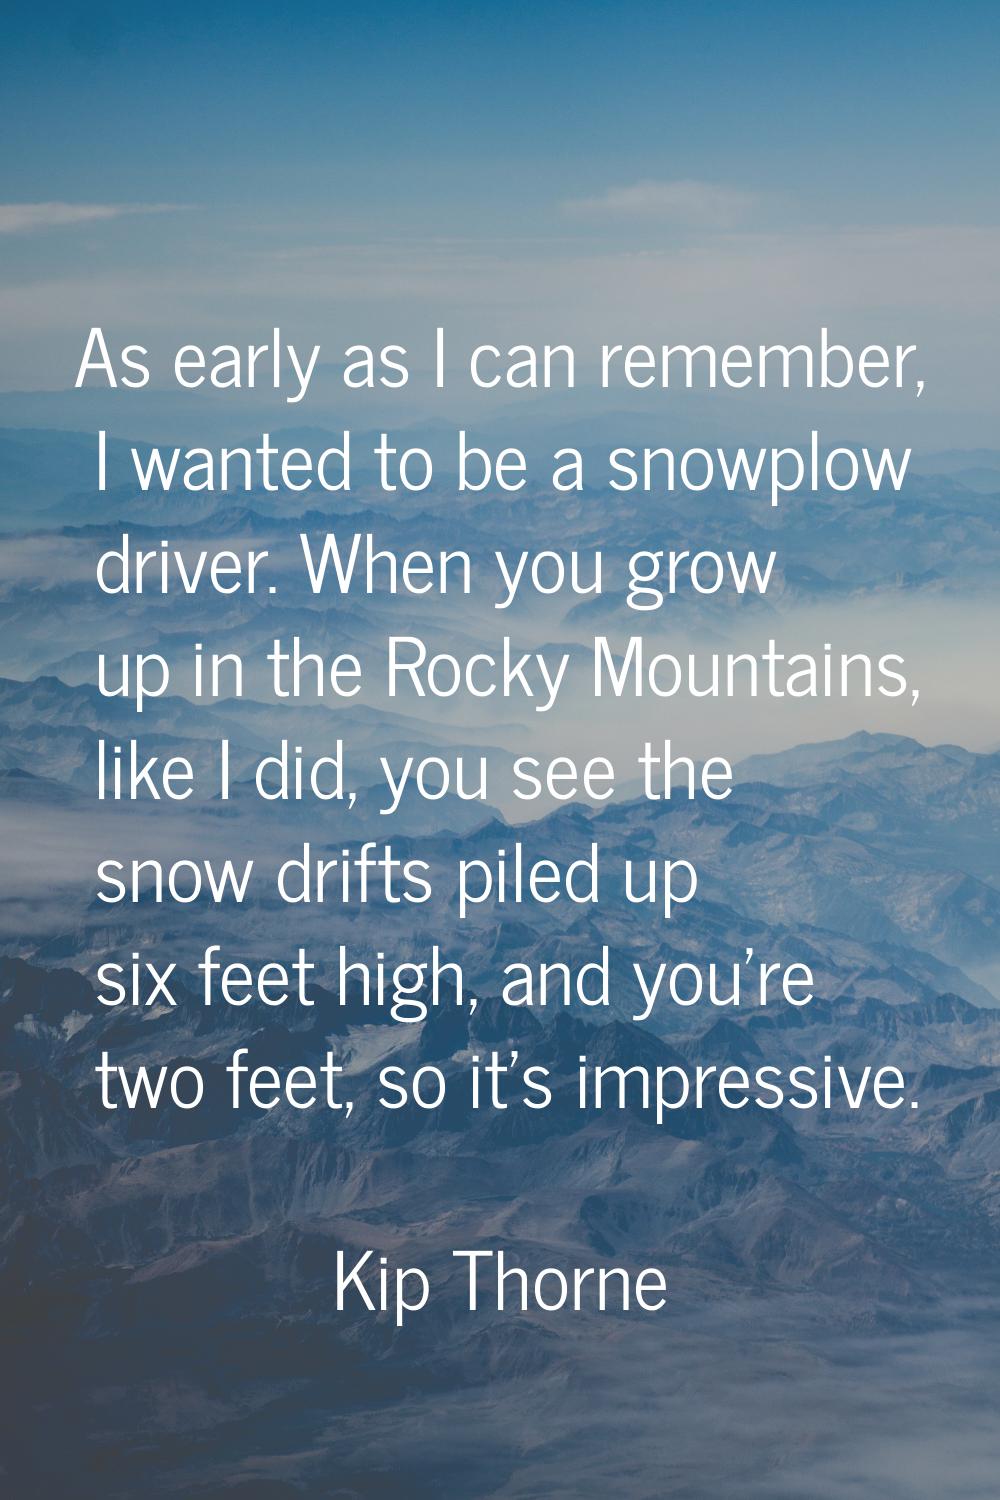 As early as I can remember, I wanted to be a snowplow driver. When you grow up in the Rocky Mountai